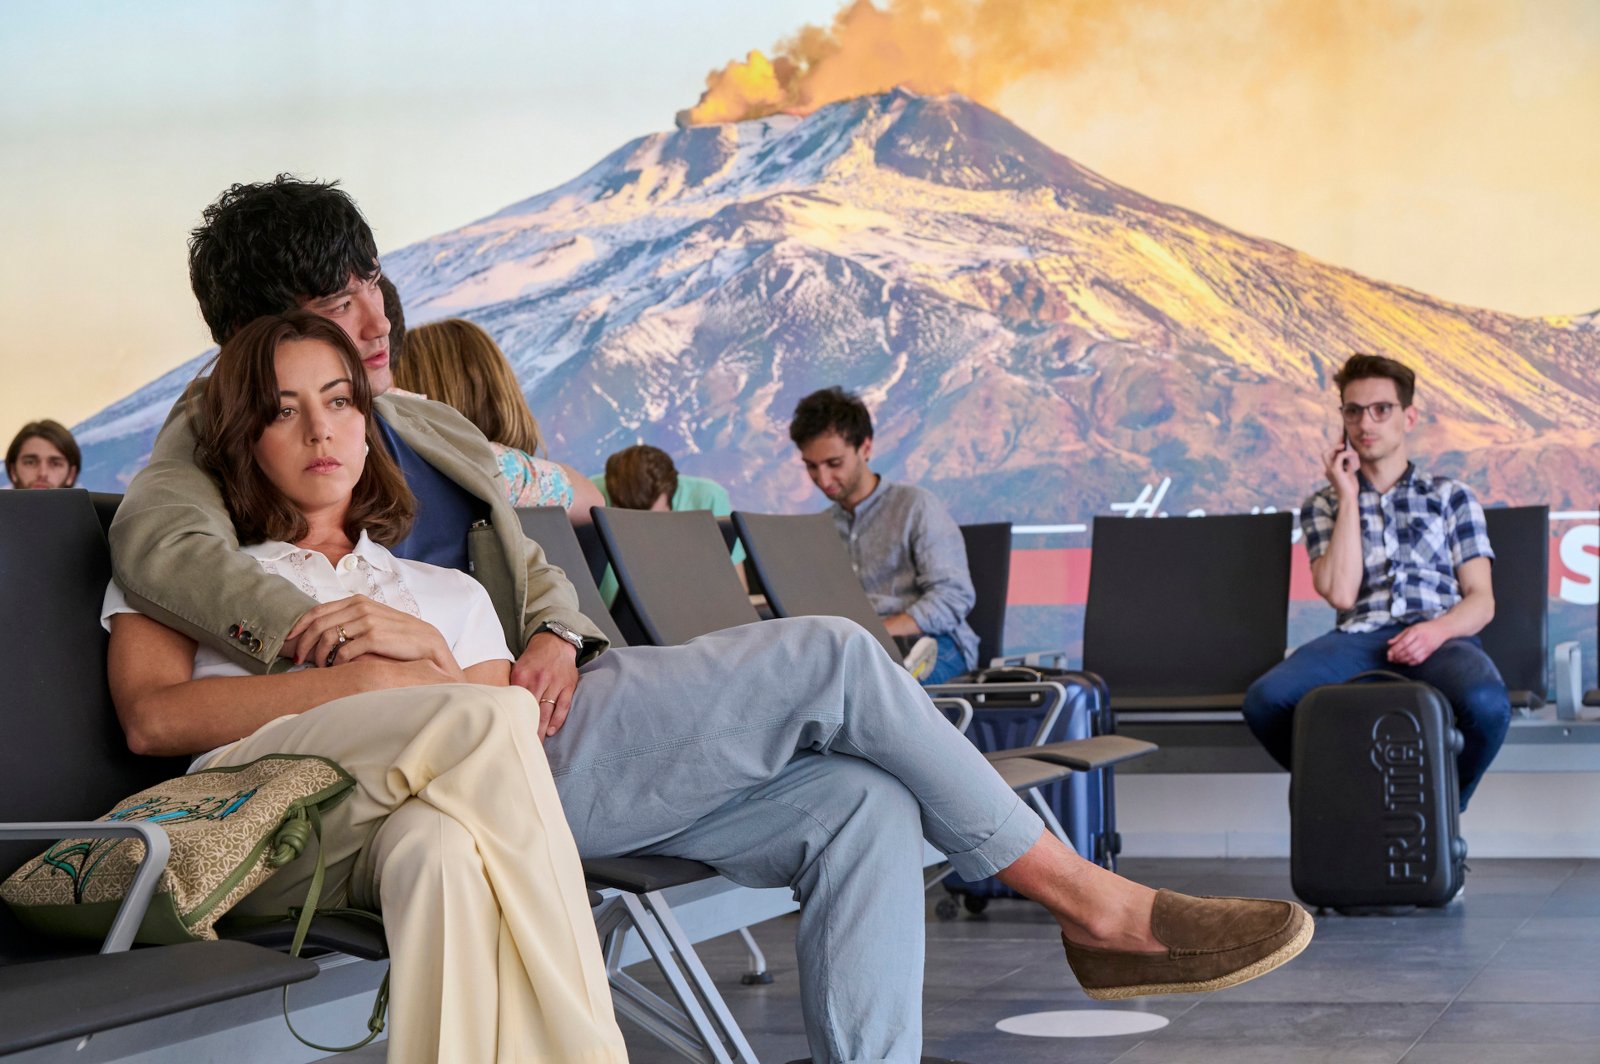 Aubrey Plaza and Will Sharpe in 'The White Lotus' Season 2 finale for our article about shows like it to watch before season 3. They're sitting in an airport, and he has his arm around her.